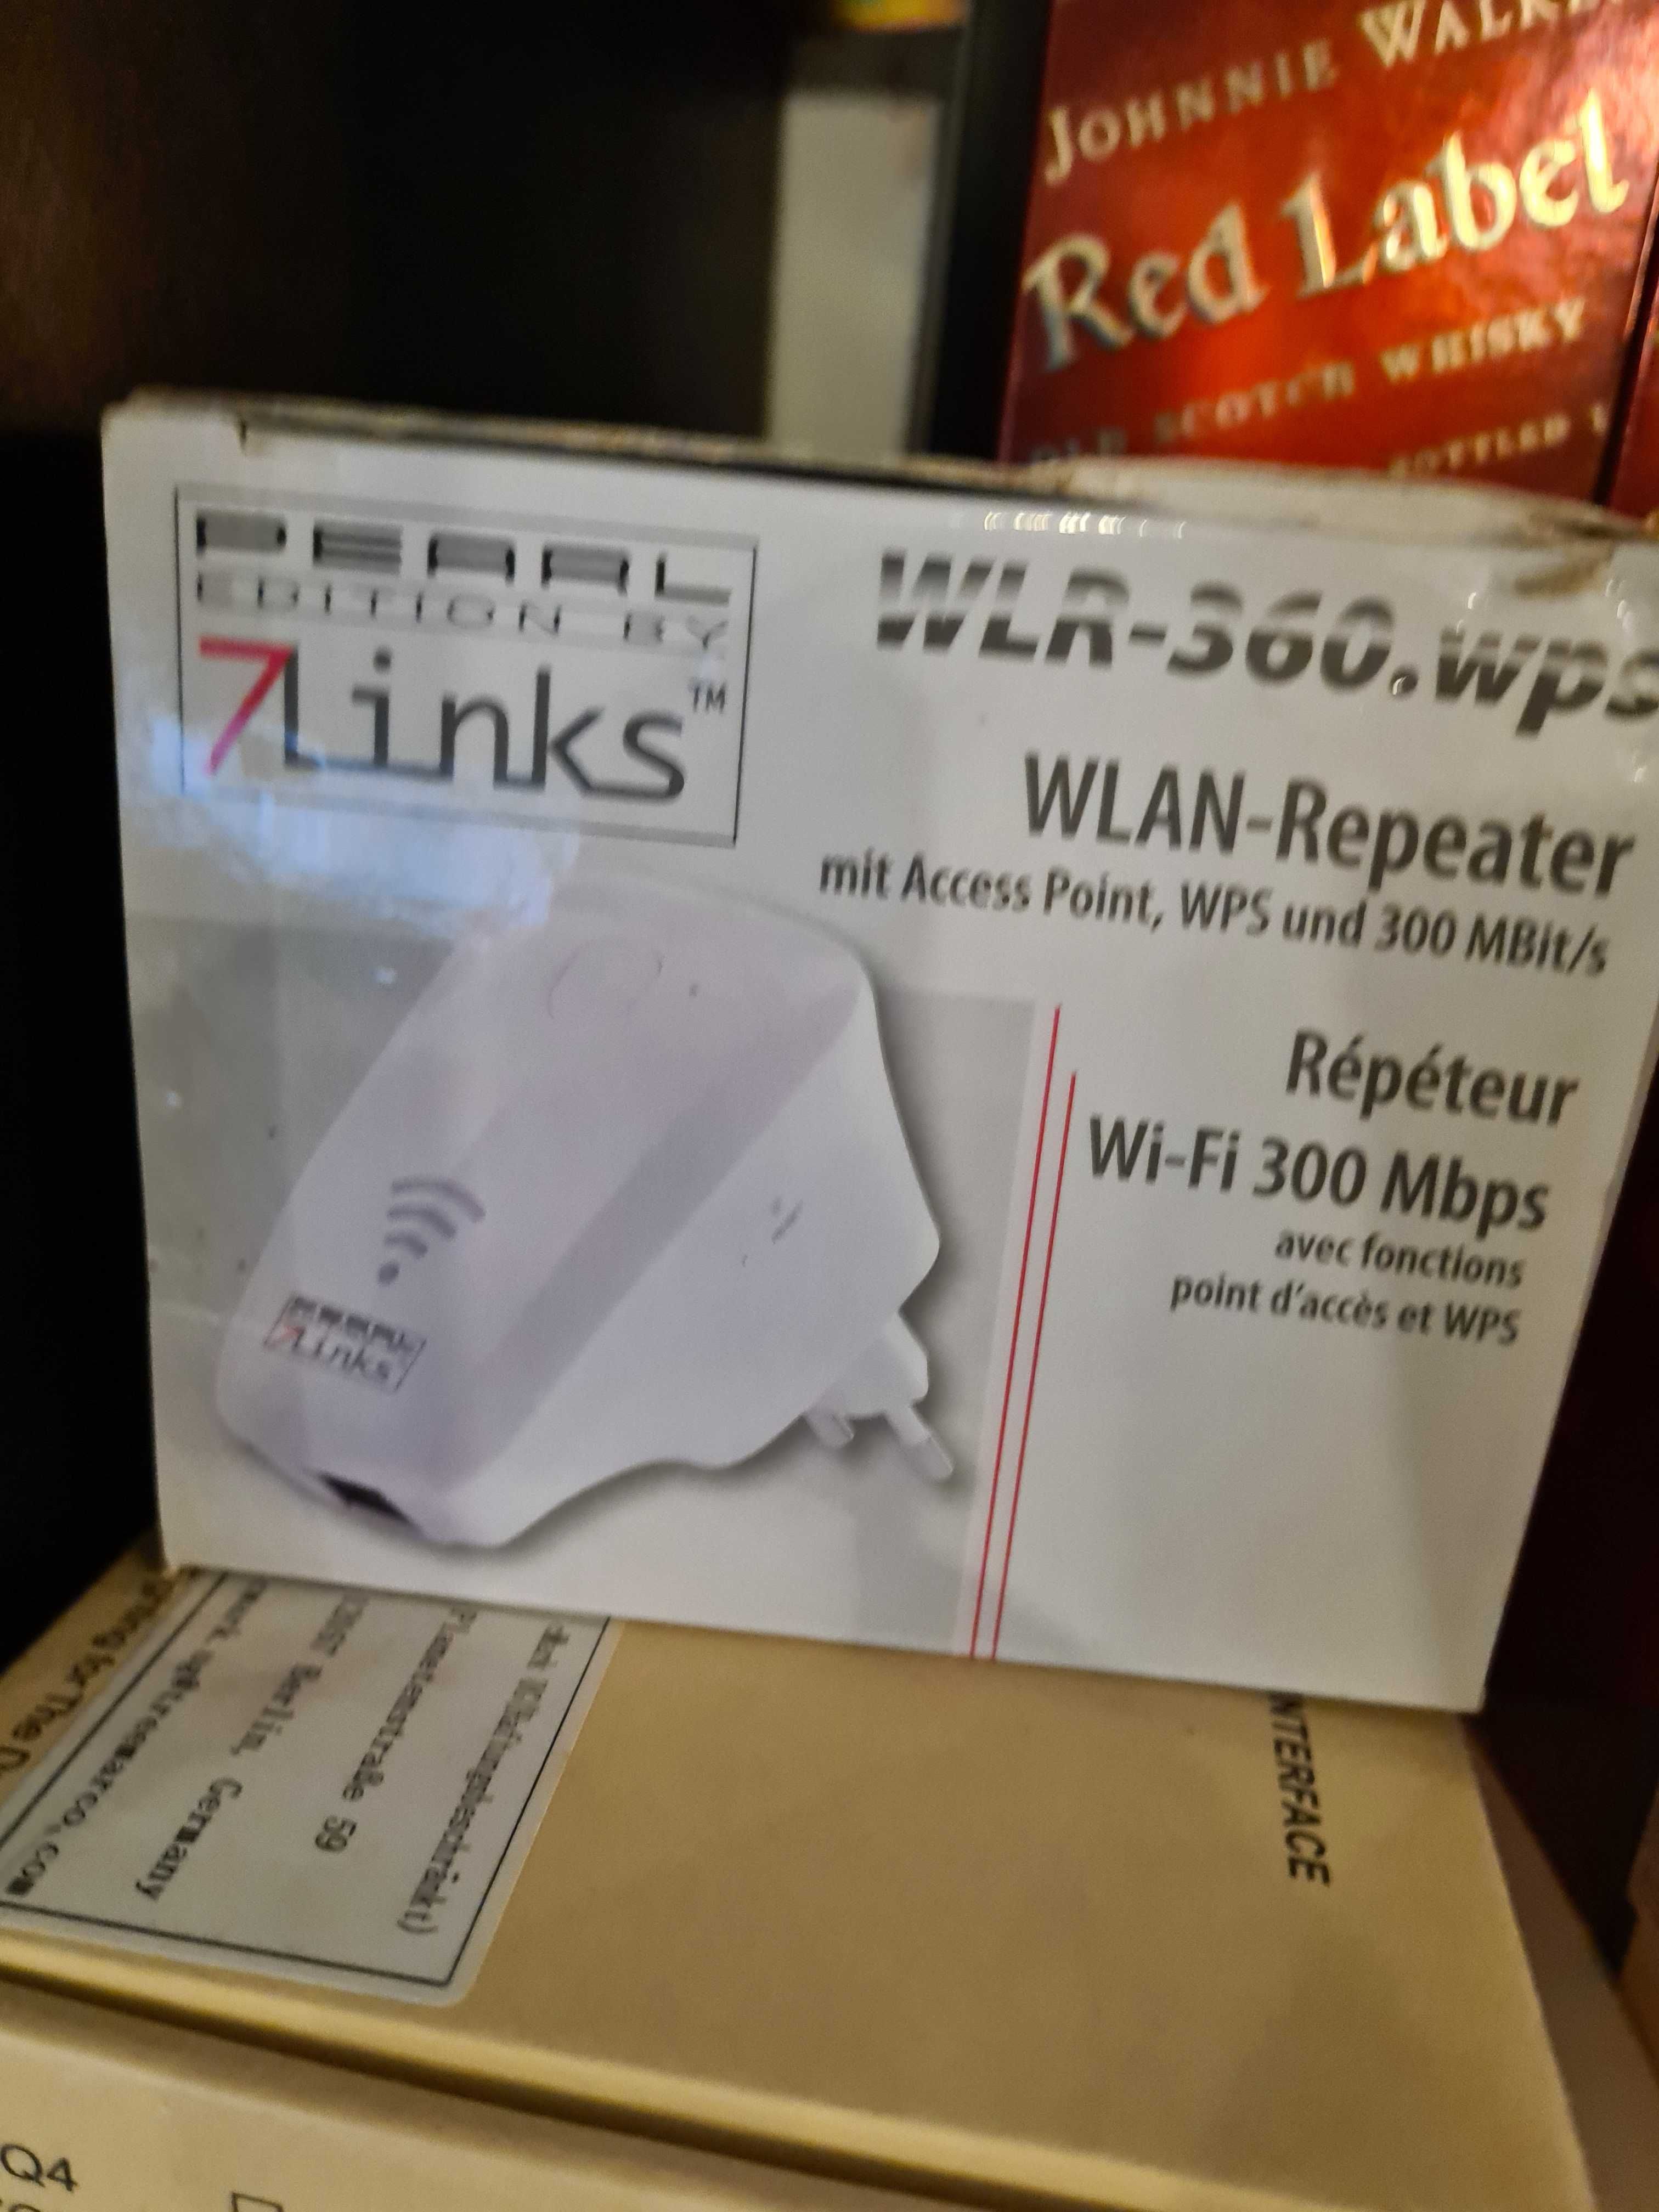 Wifi repater PEARL 7Links 300Mbs Acces point WPS